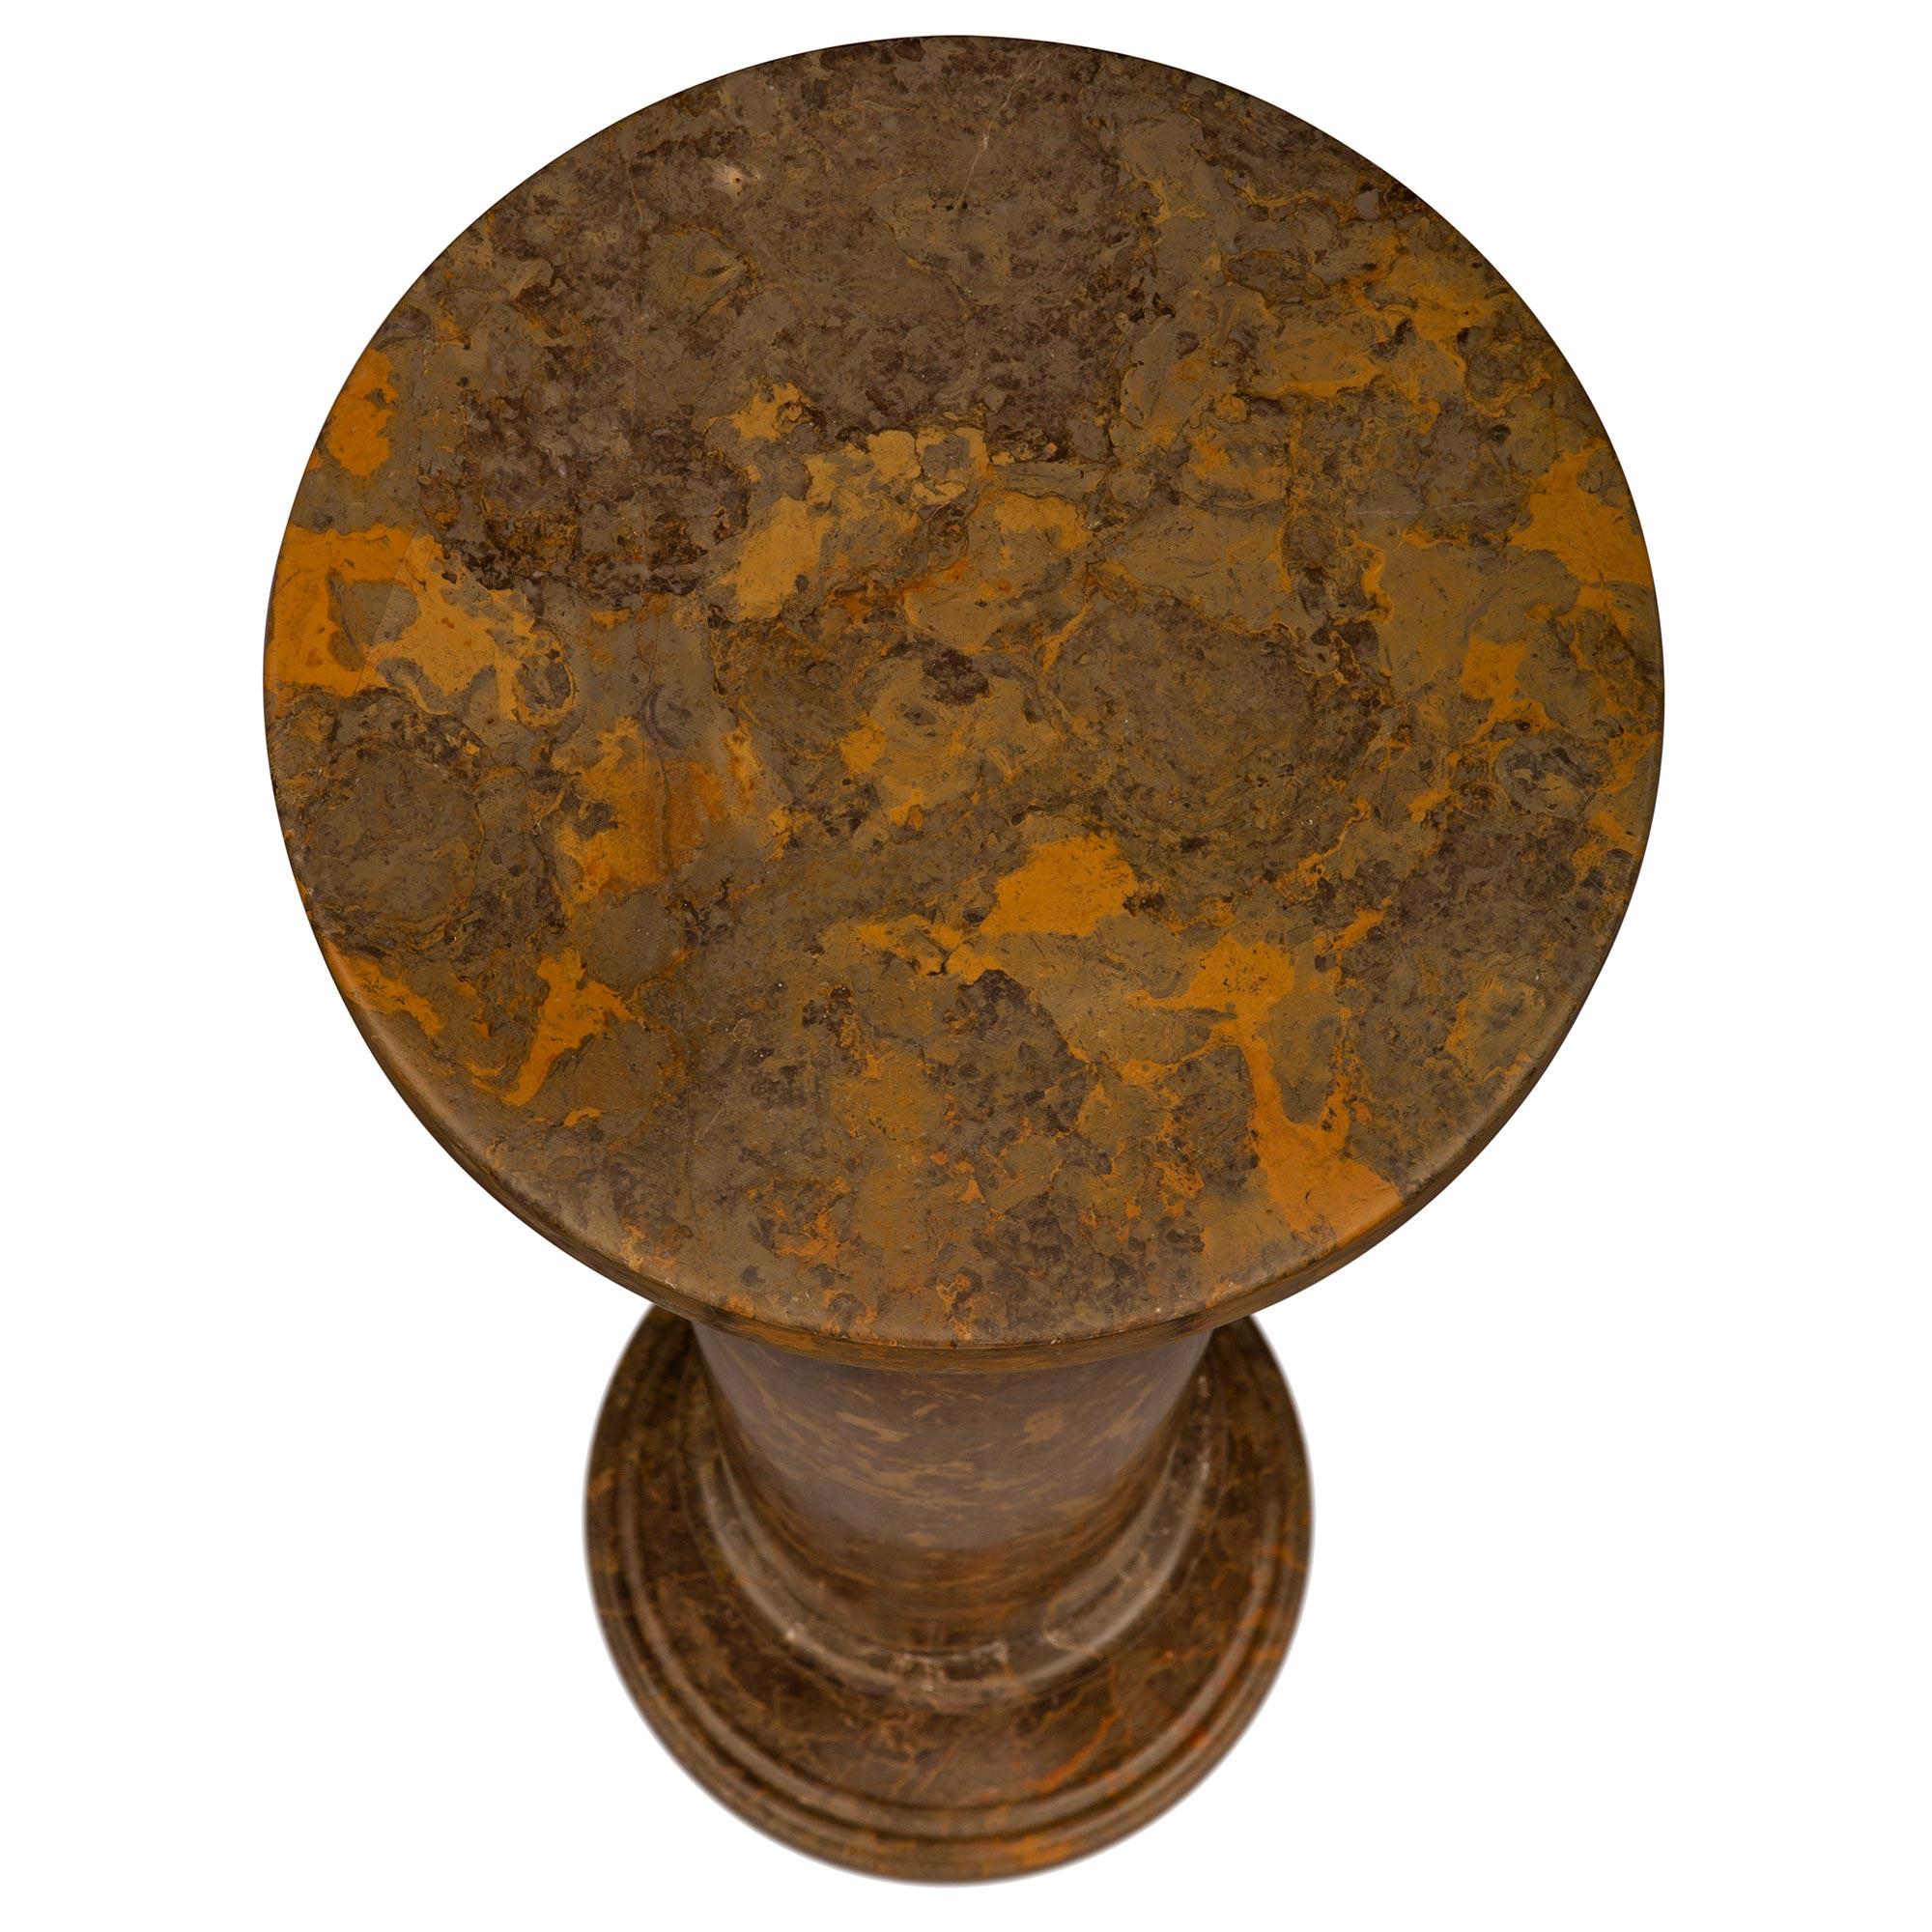 A striking Italian 19th century Neo-Classical st. faux painted composite stone pedestal column. The column is raised by a circular base with a fine double mottled border and elegantly curved design. The circular central support displays a